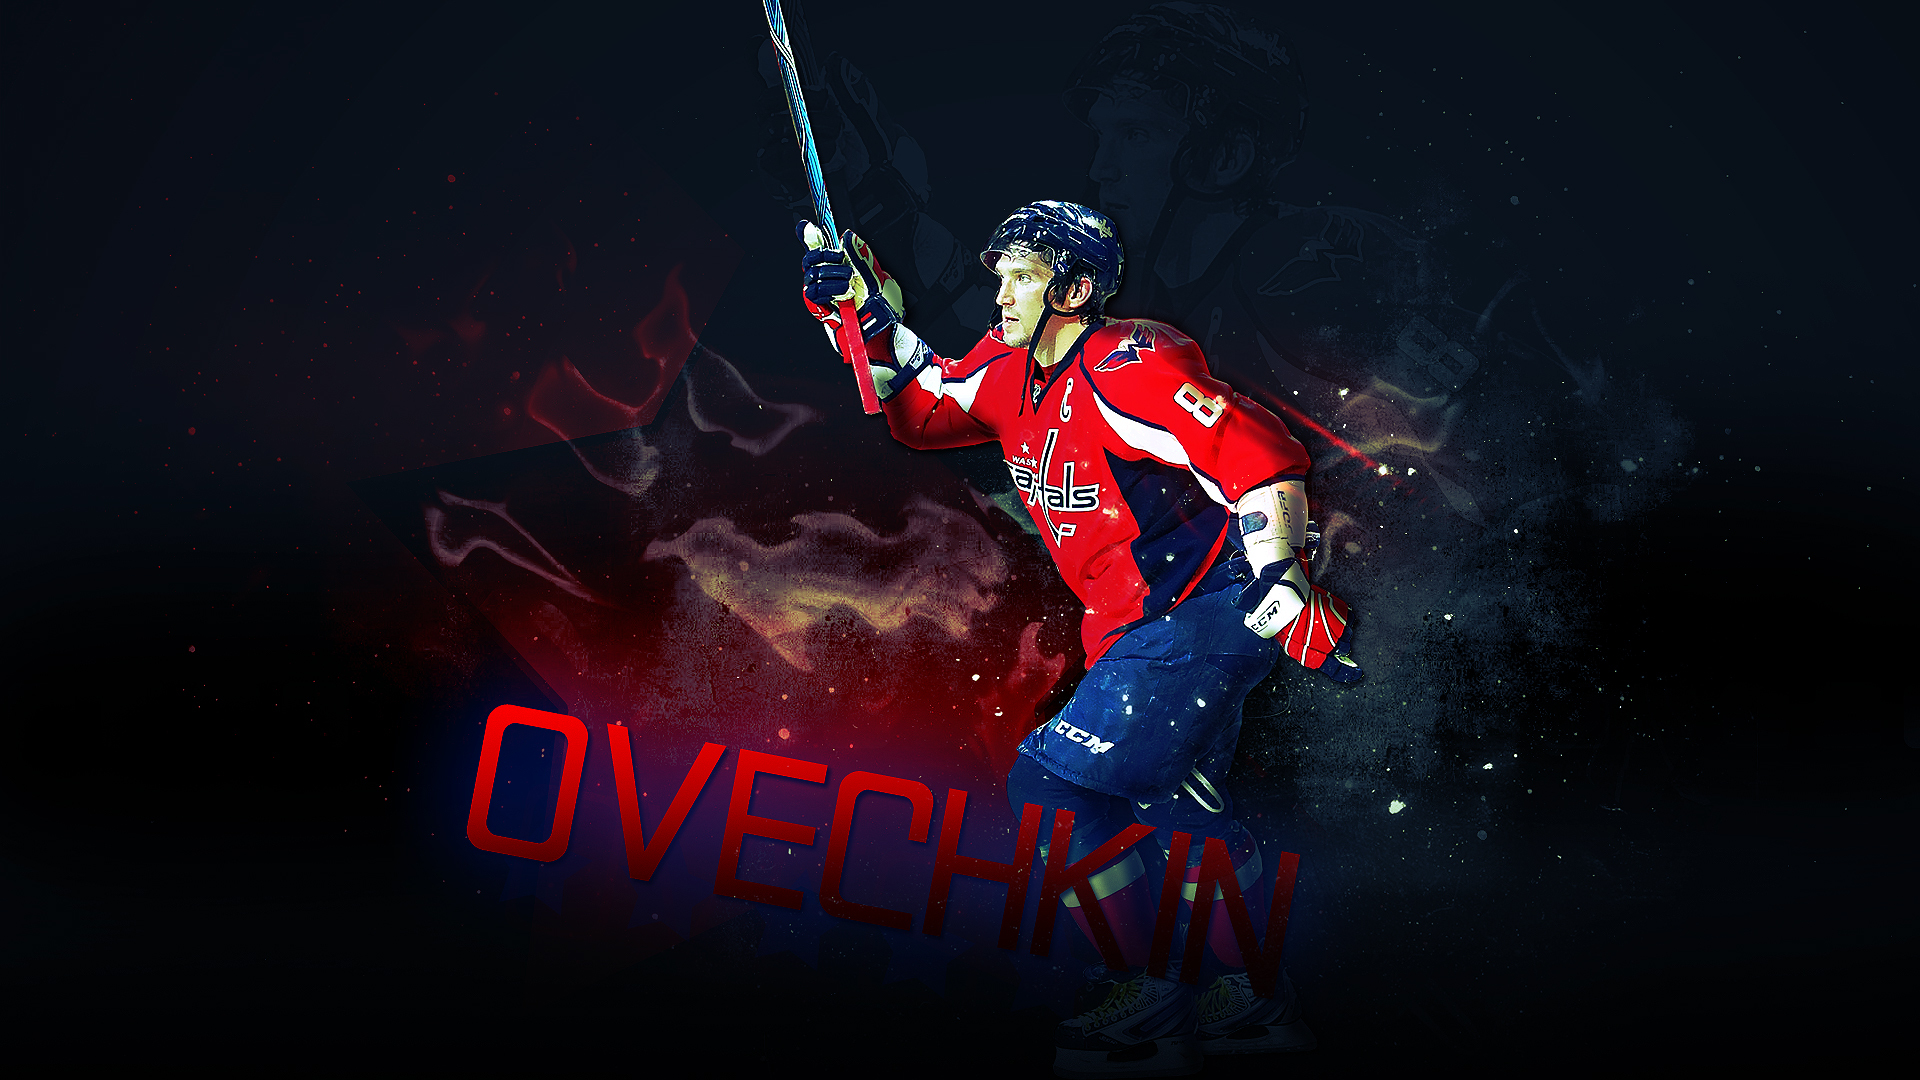 Famous Hockey Player Alexander Ovechkin Wallpaper And